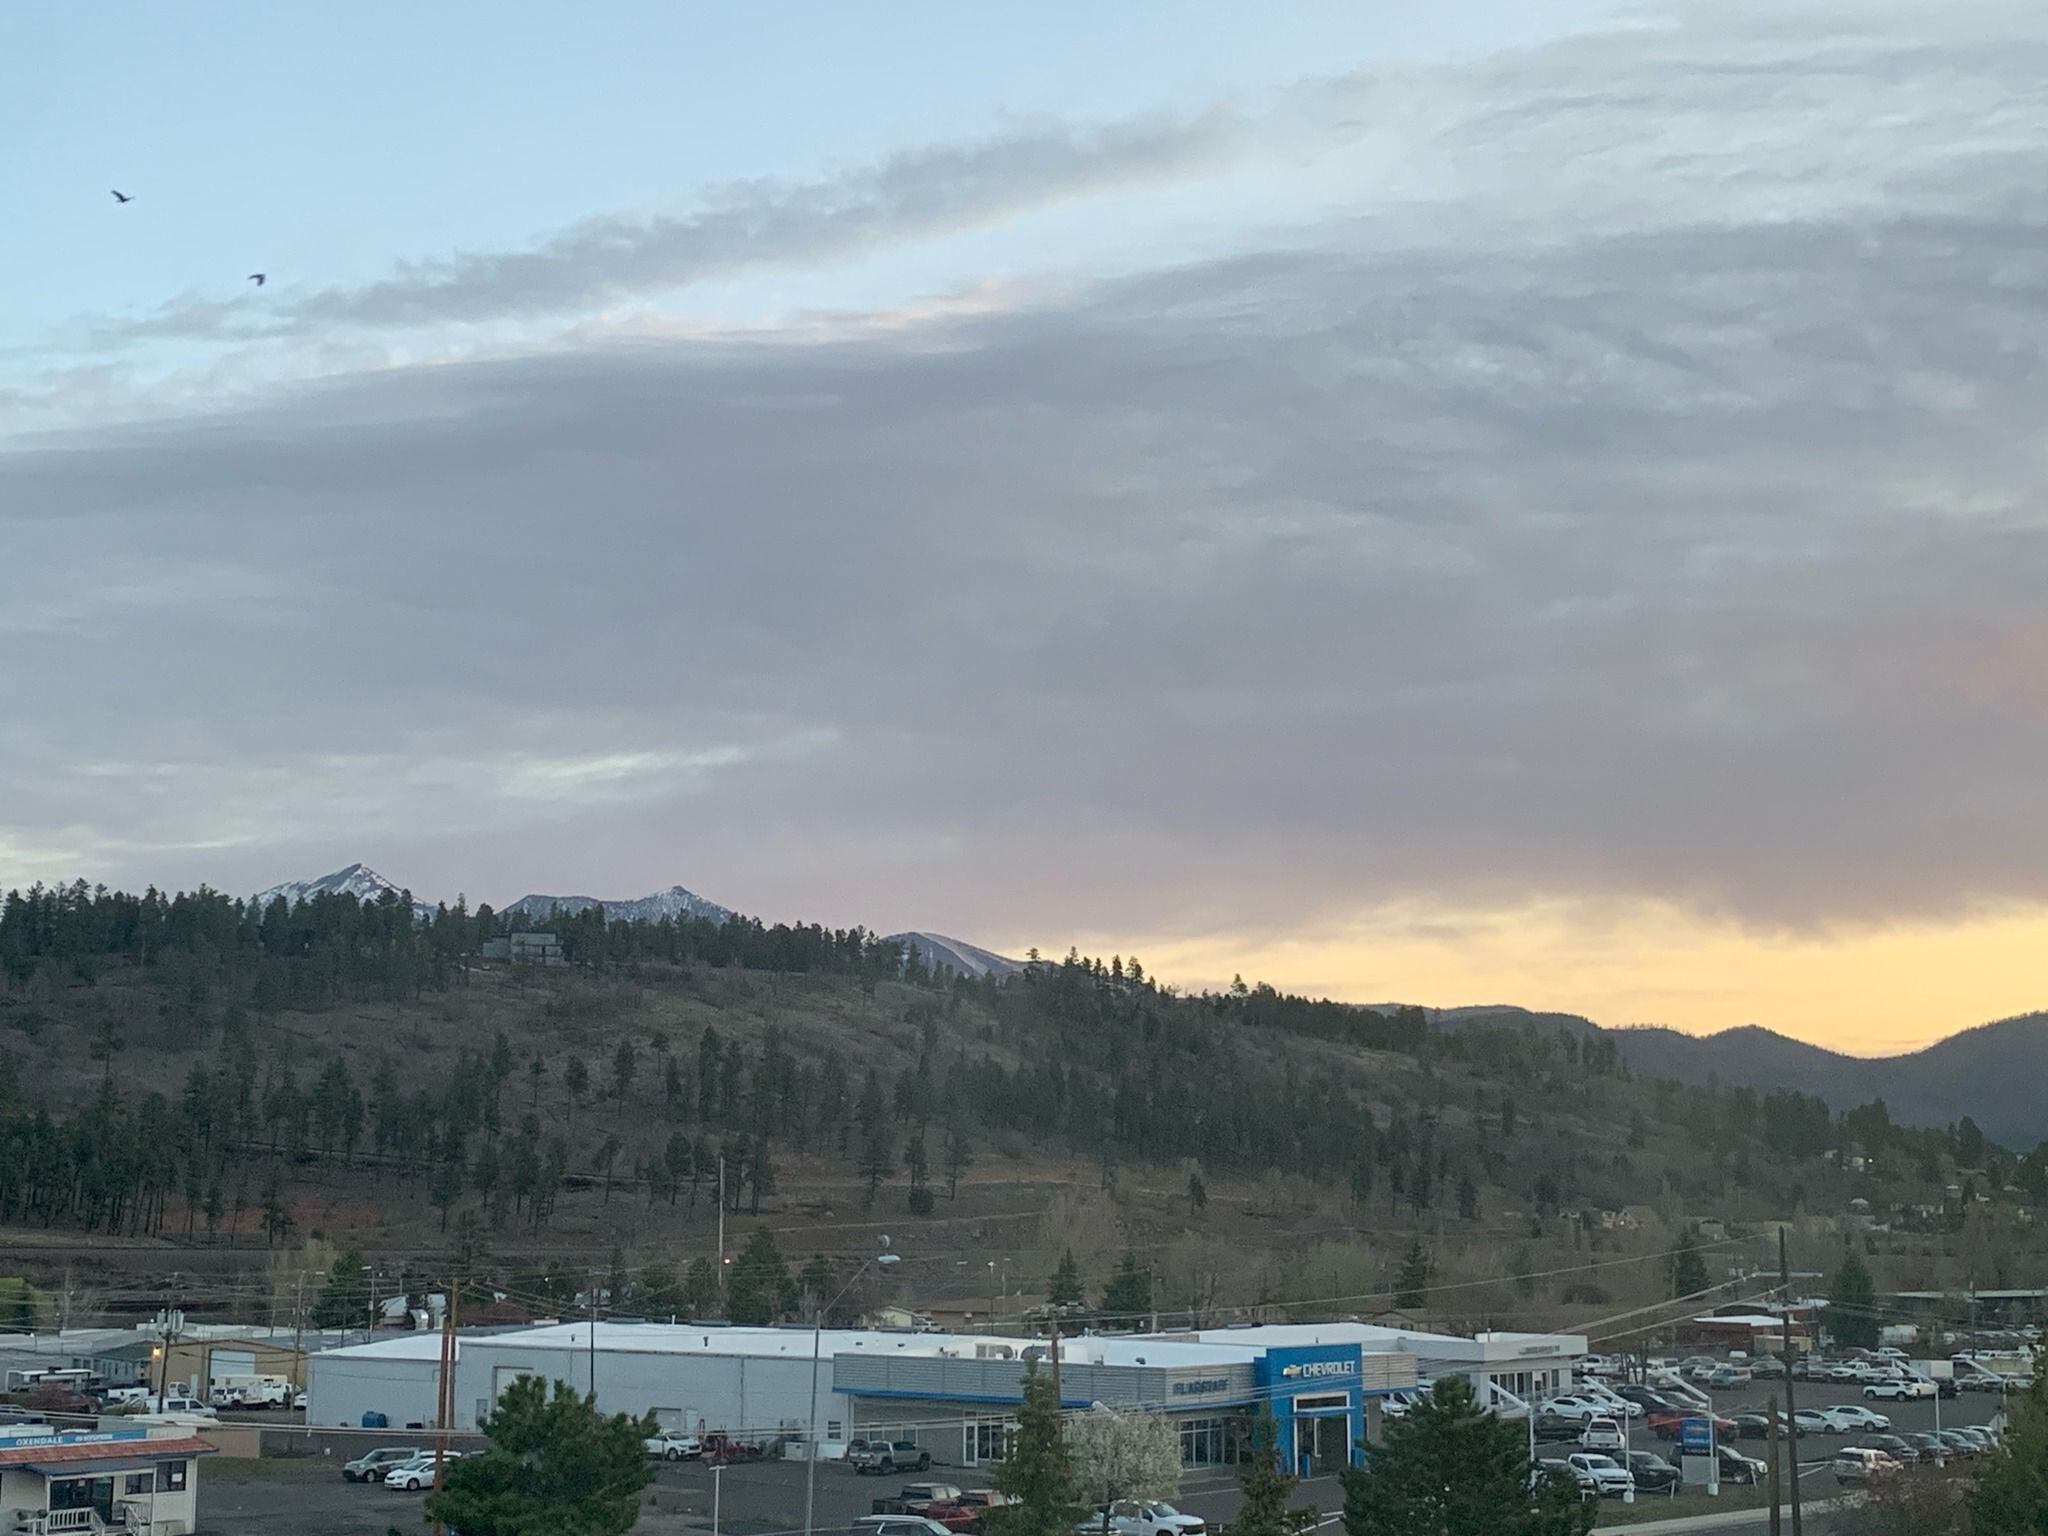 View from WJOL's live broadcasting site in Flagstaff, AZ on Tuesday, May 2nd.